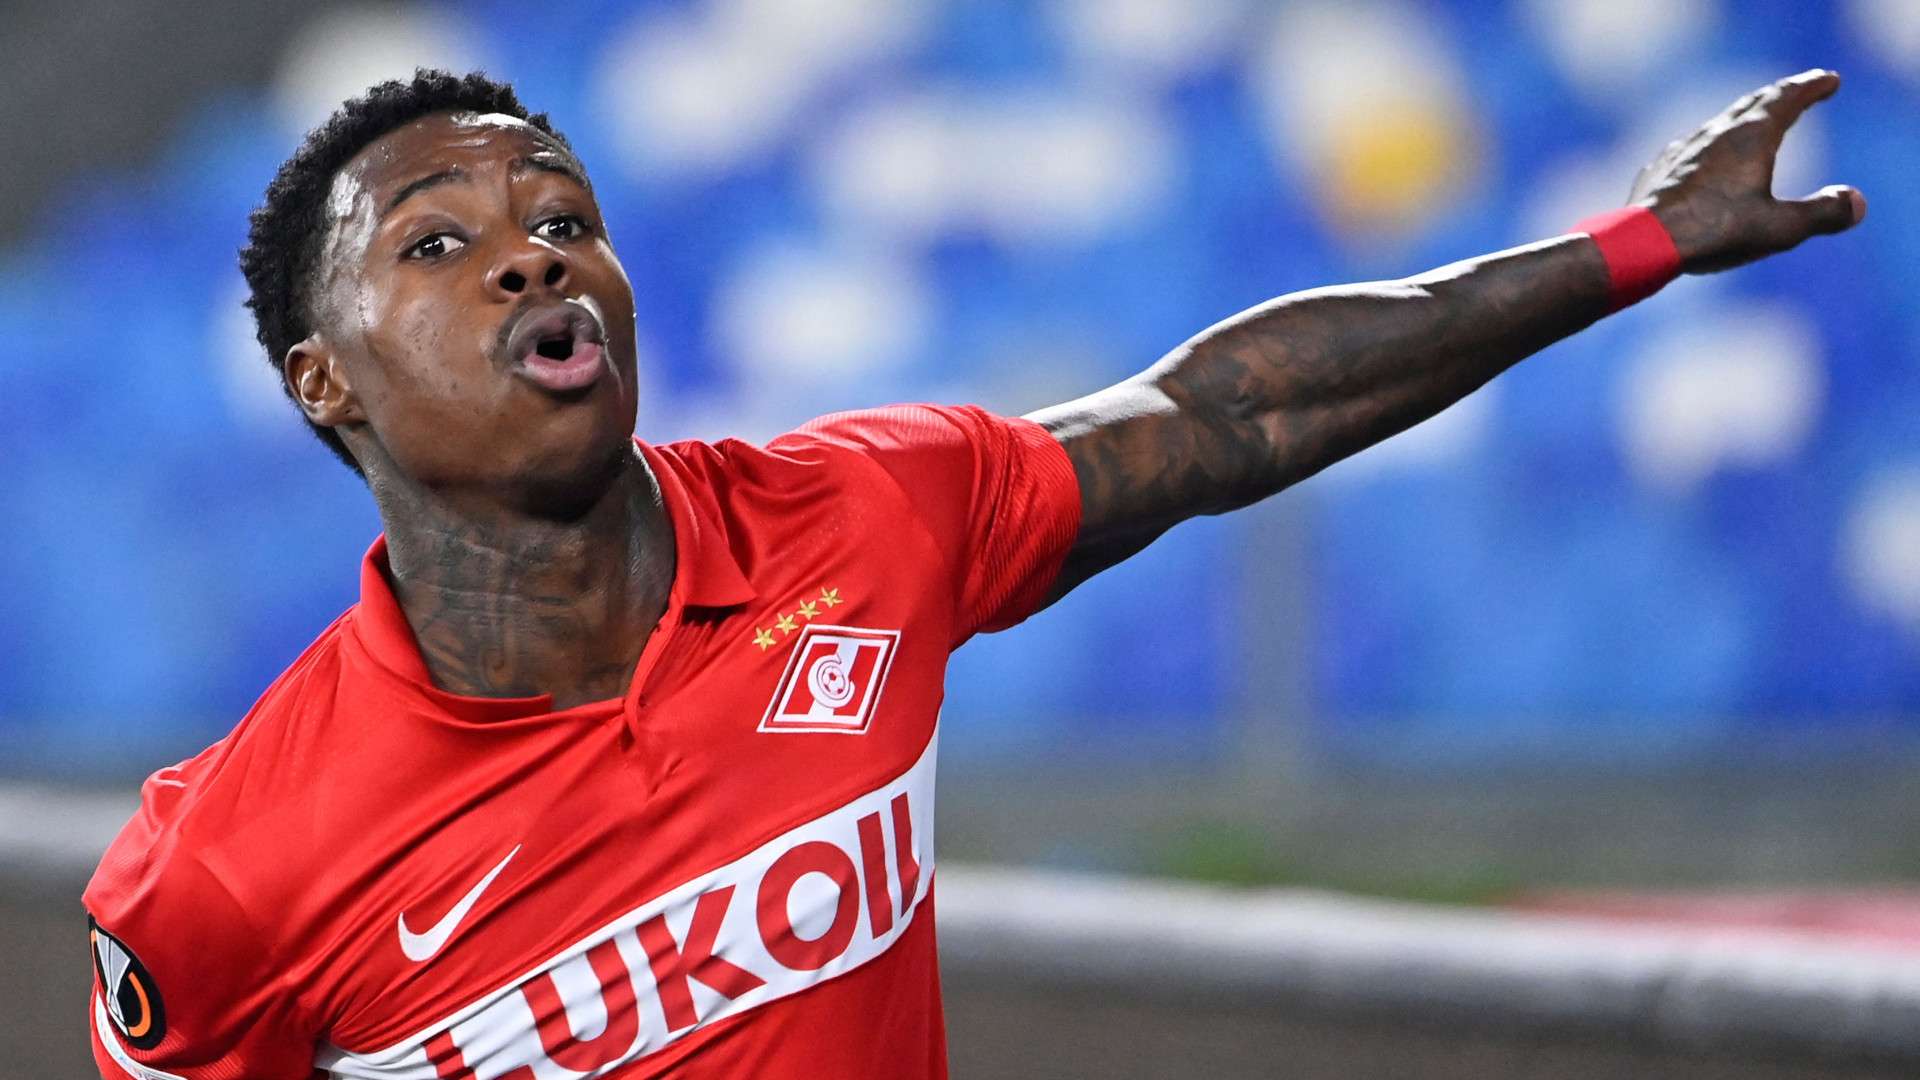 QUINCY PROMES SPARTAK